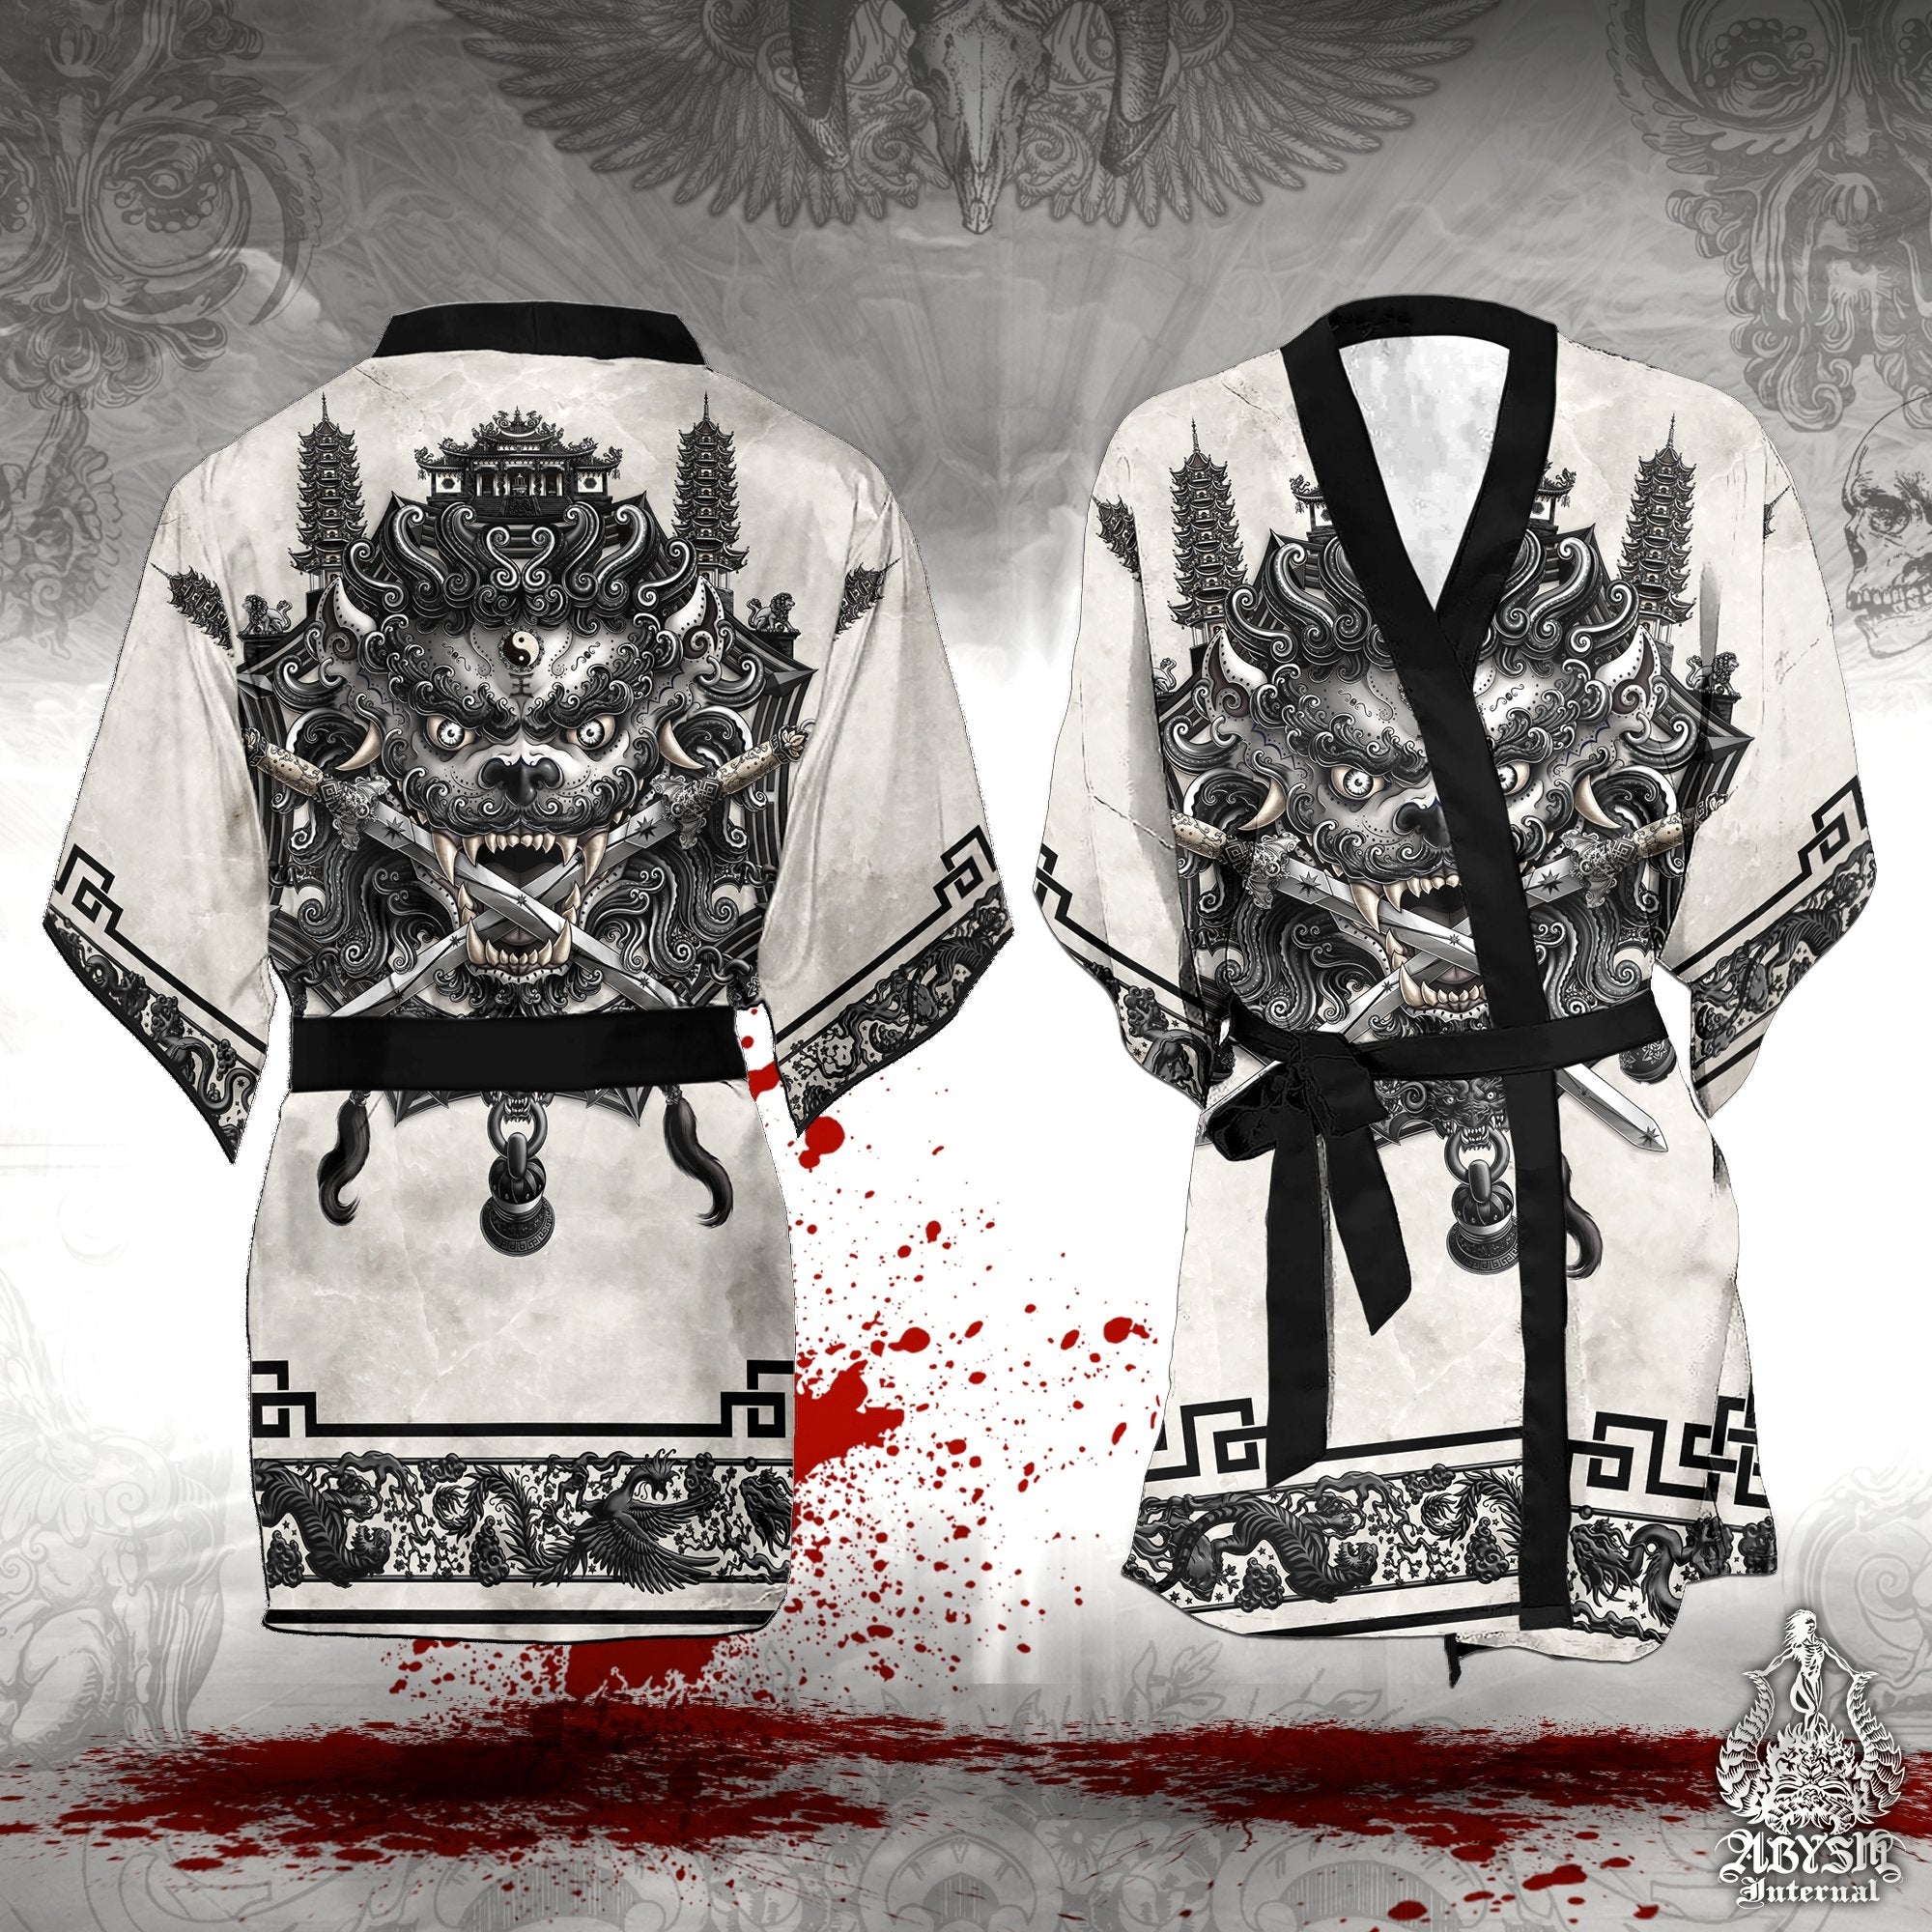 Sword Lion Cover Up, Beach Outfit, Chinese Party Kimono, Taiwan Summer Festival Robe, Asian Indie and Alternative Clothing, Unisex - Black and White Goth - Abysm Internal